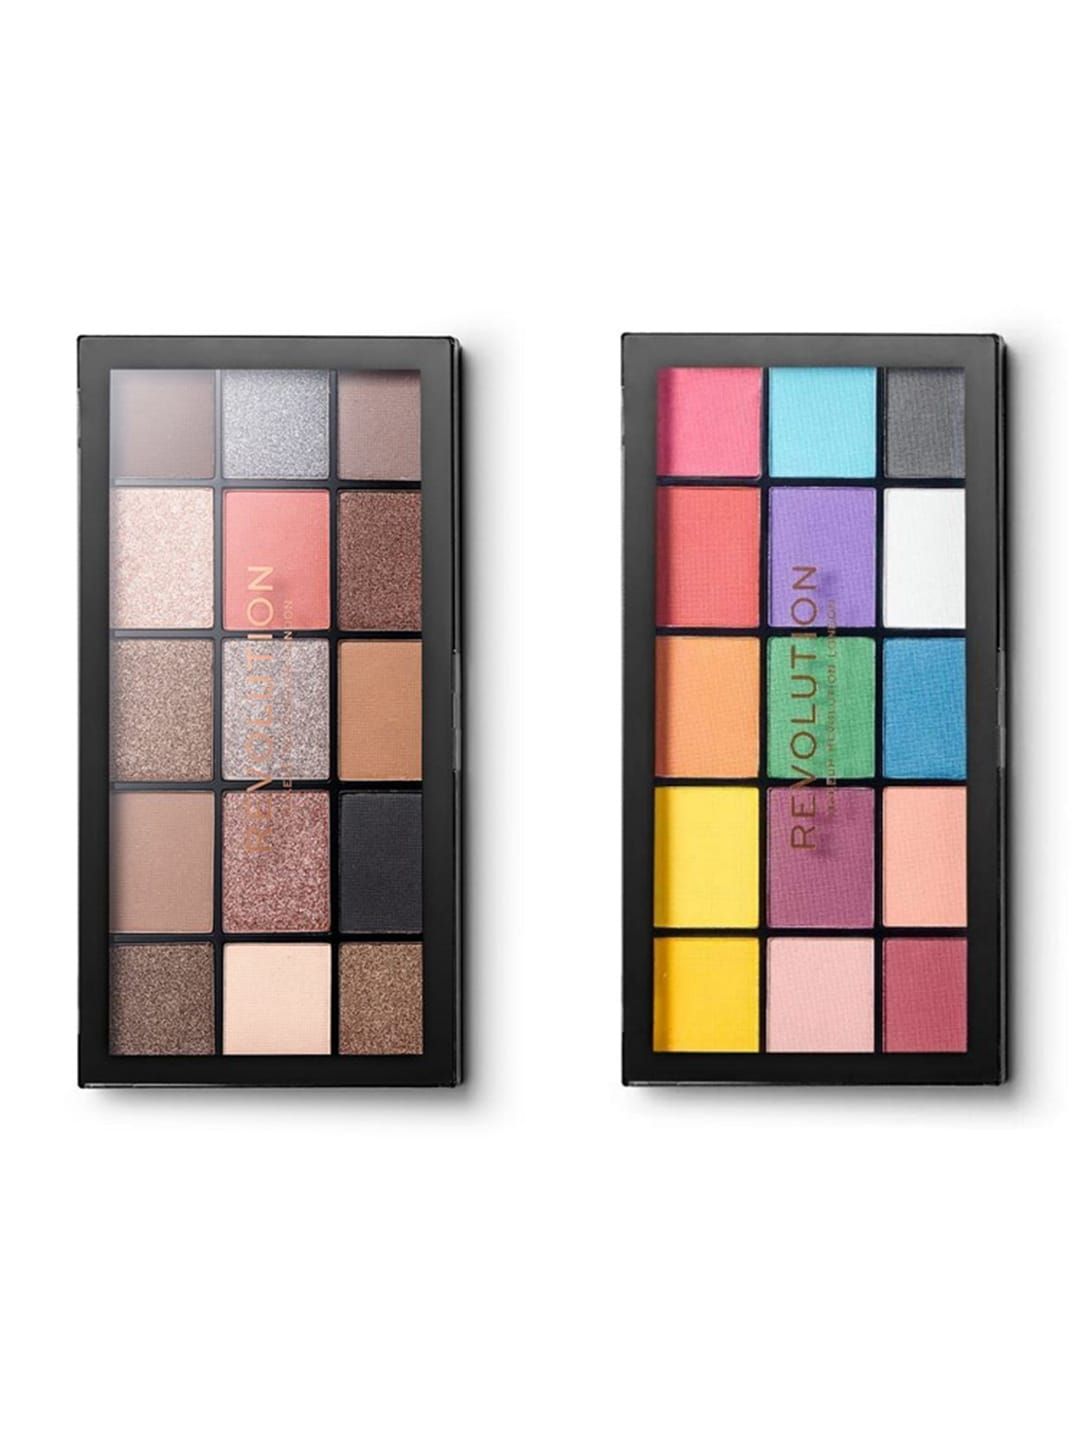 Makeup Revolution London Reloaded Combo I Eyeshadow Palette Price in India